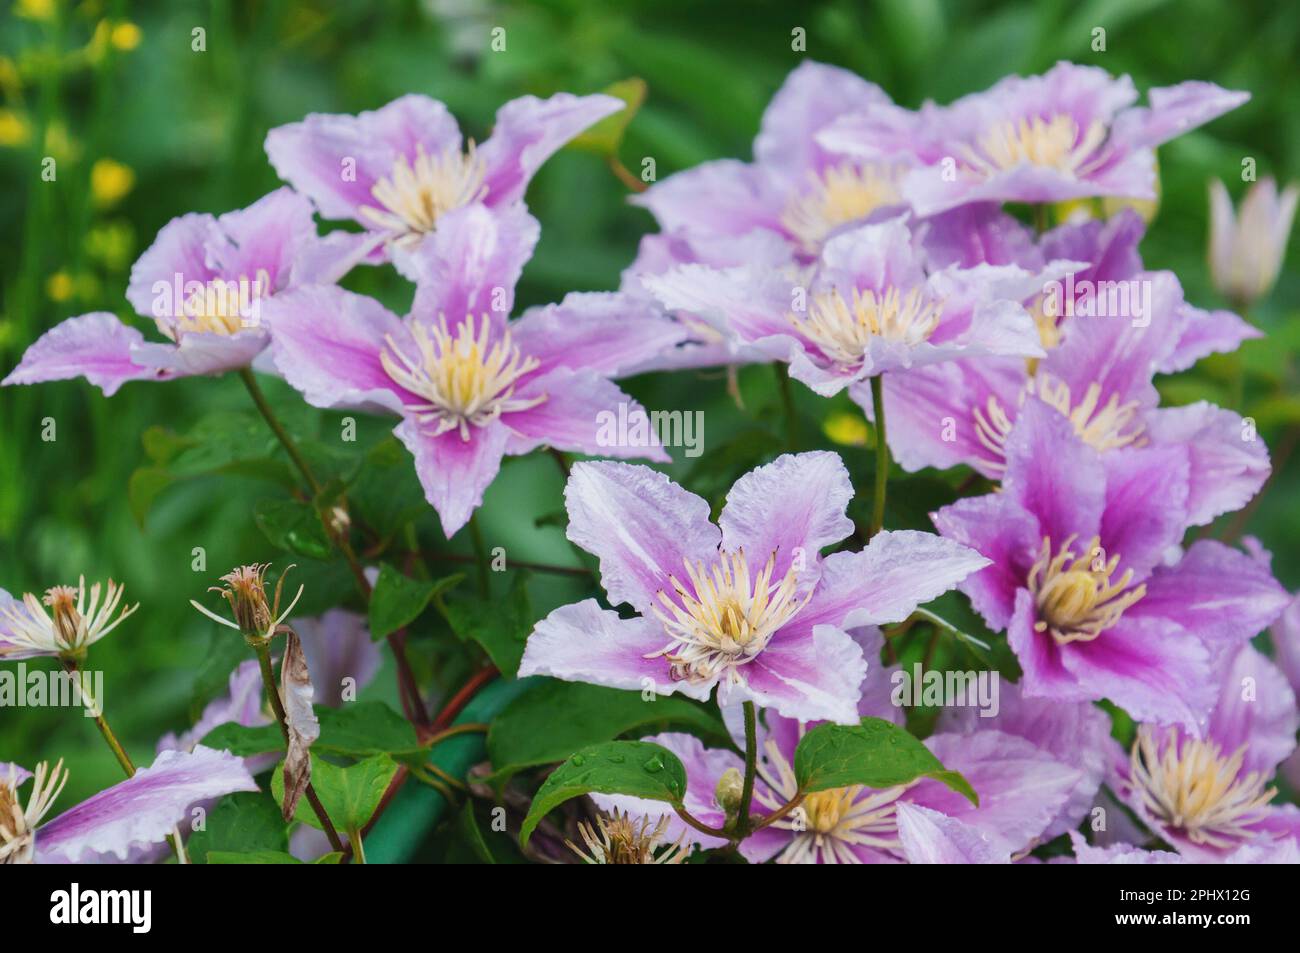 Clematis Hybrid Hagley. Flowers of perennial clematis vines in the garden. Beautiful clematis flowers near the house. Clematis climb into the garden n Stock Photo